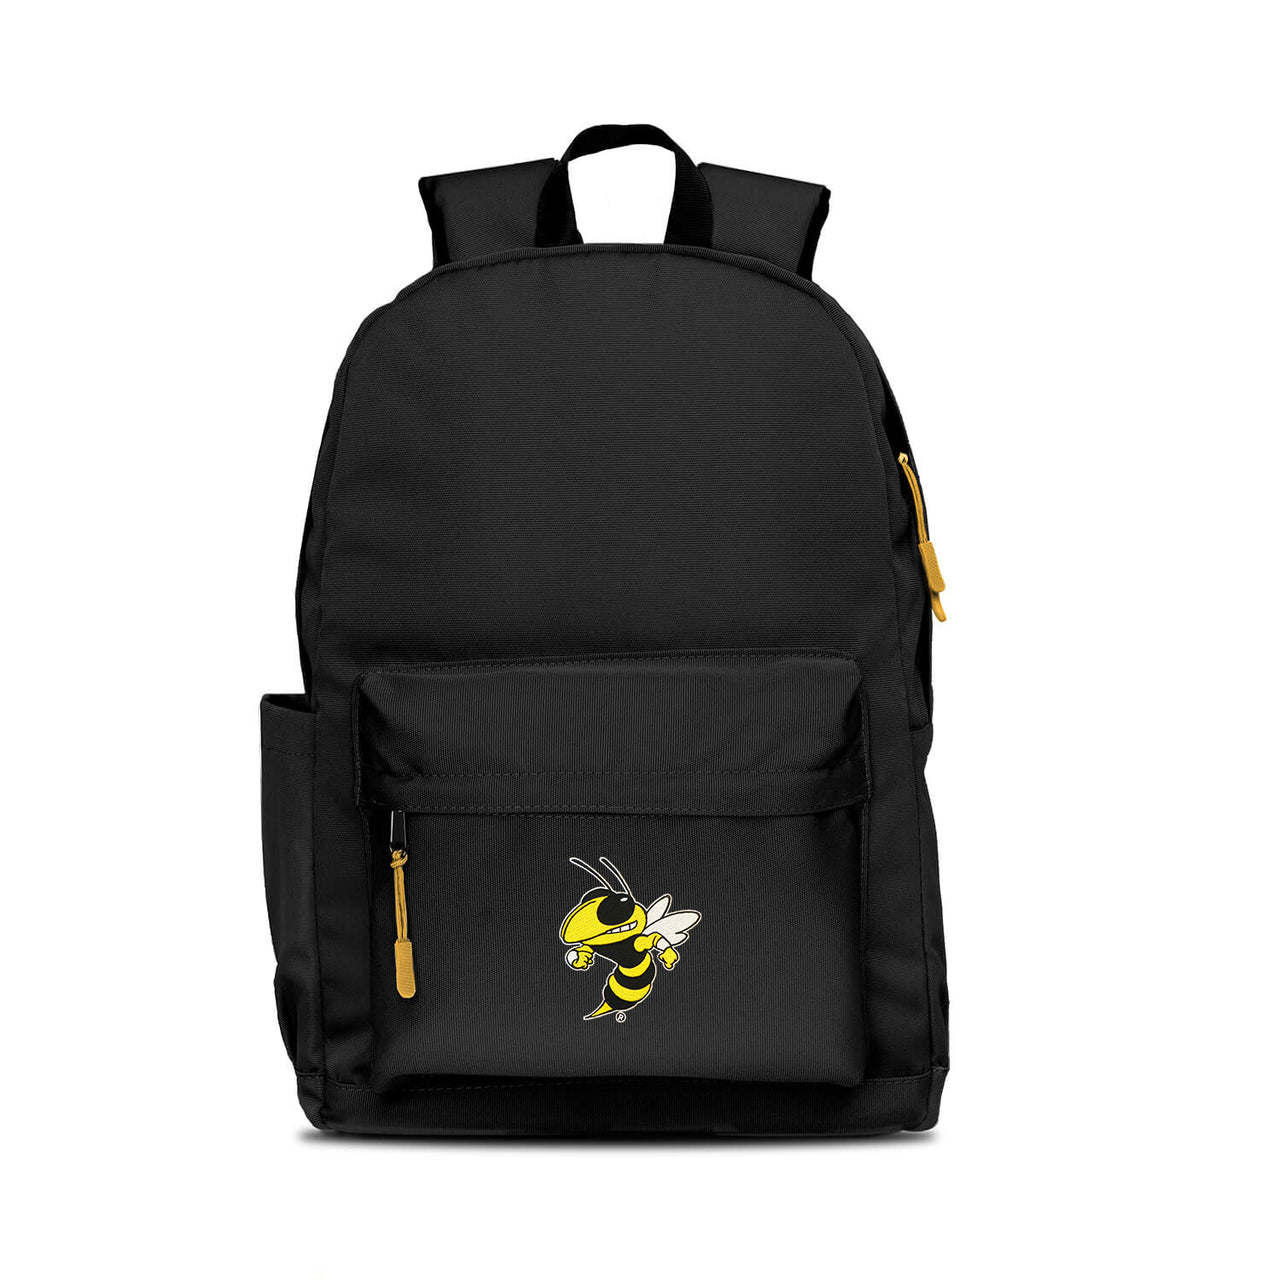 Georgia Tech Yellow Jackets Campus Laptop Backpack- Black